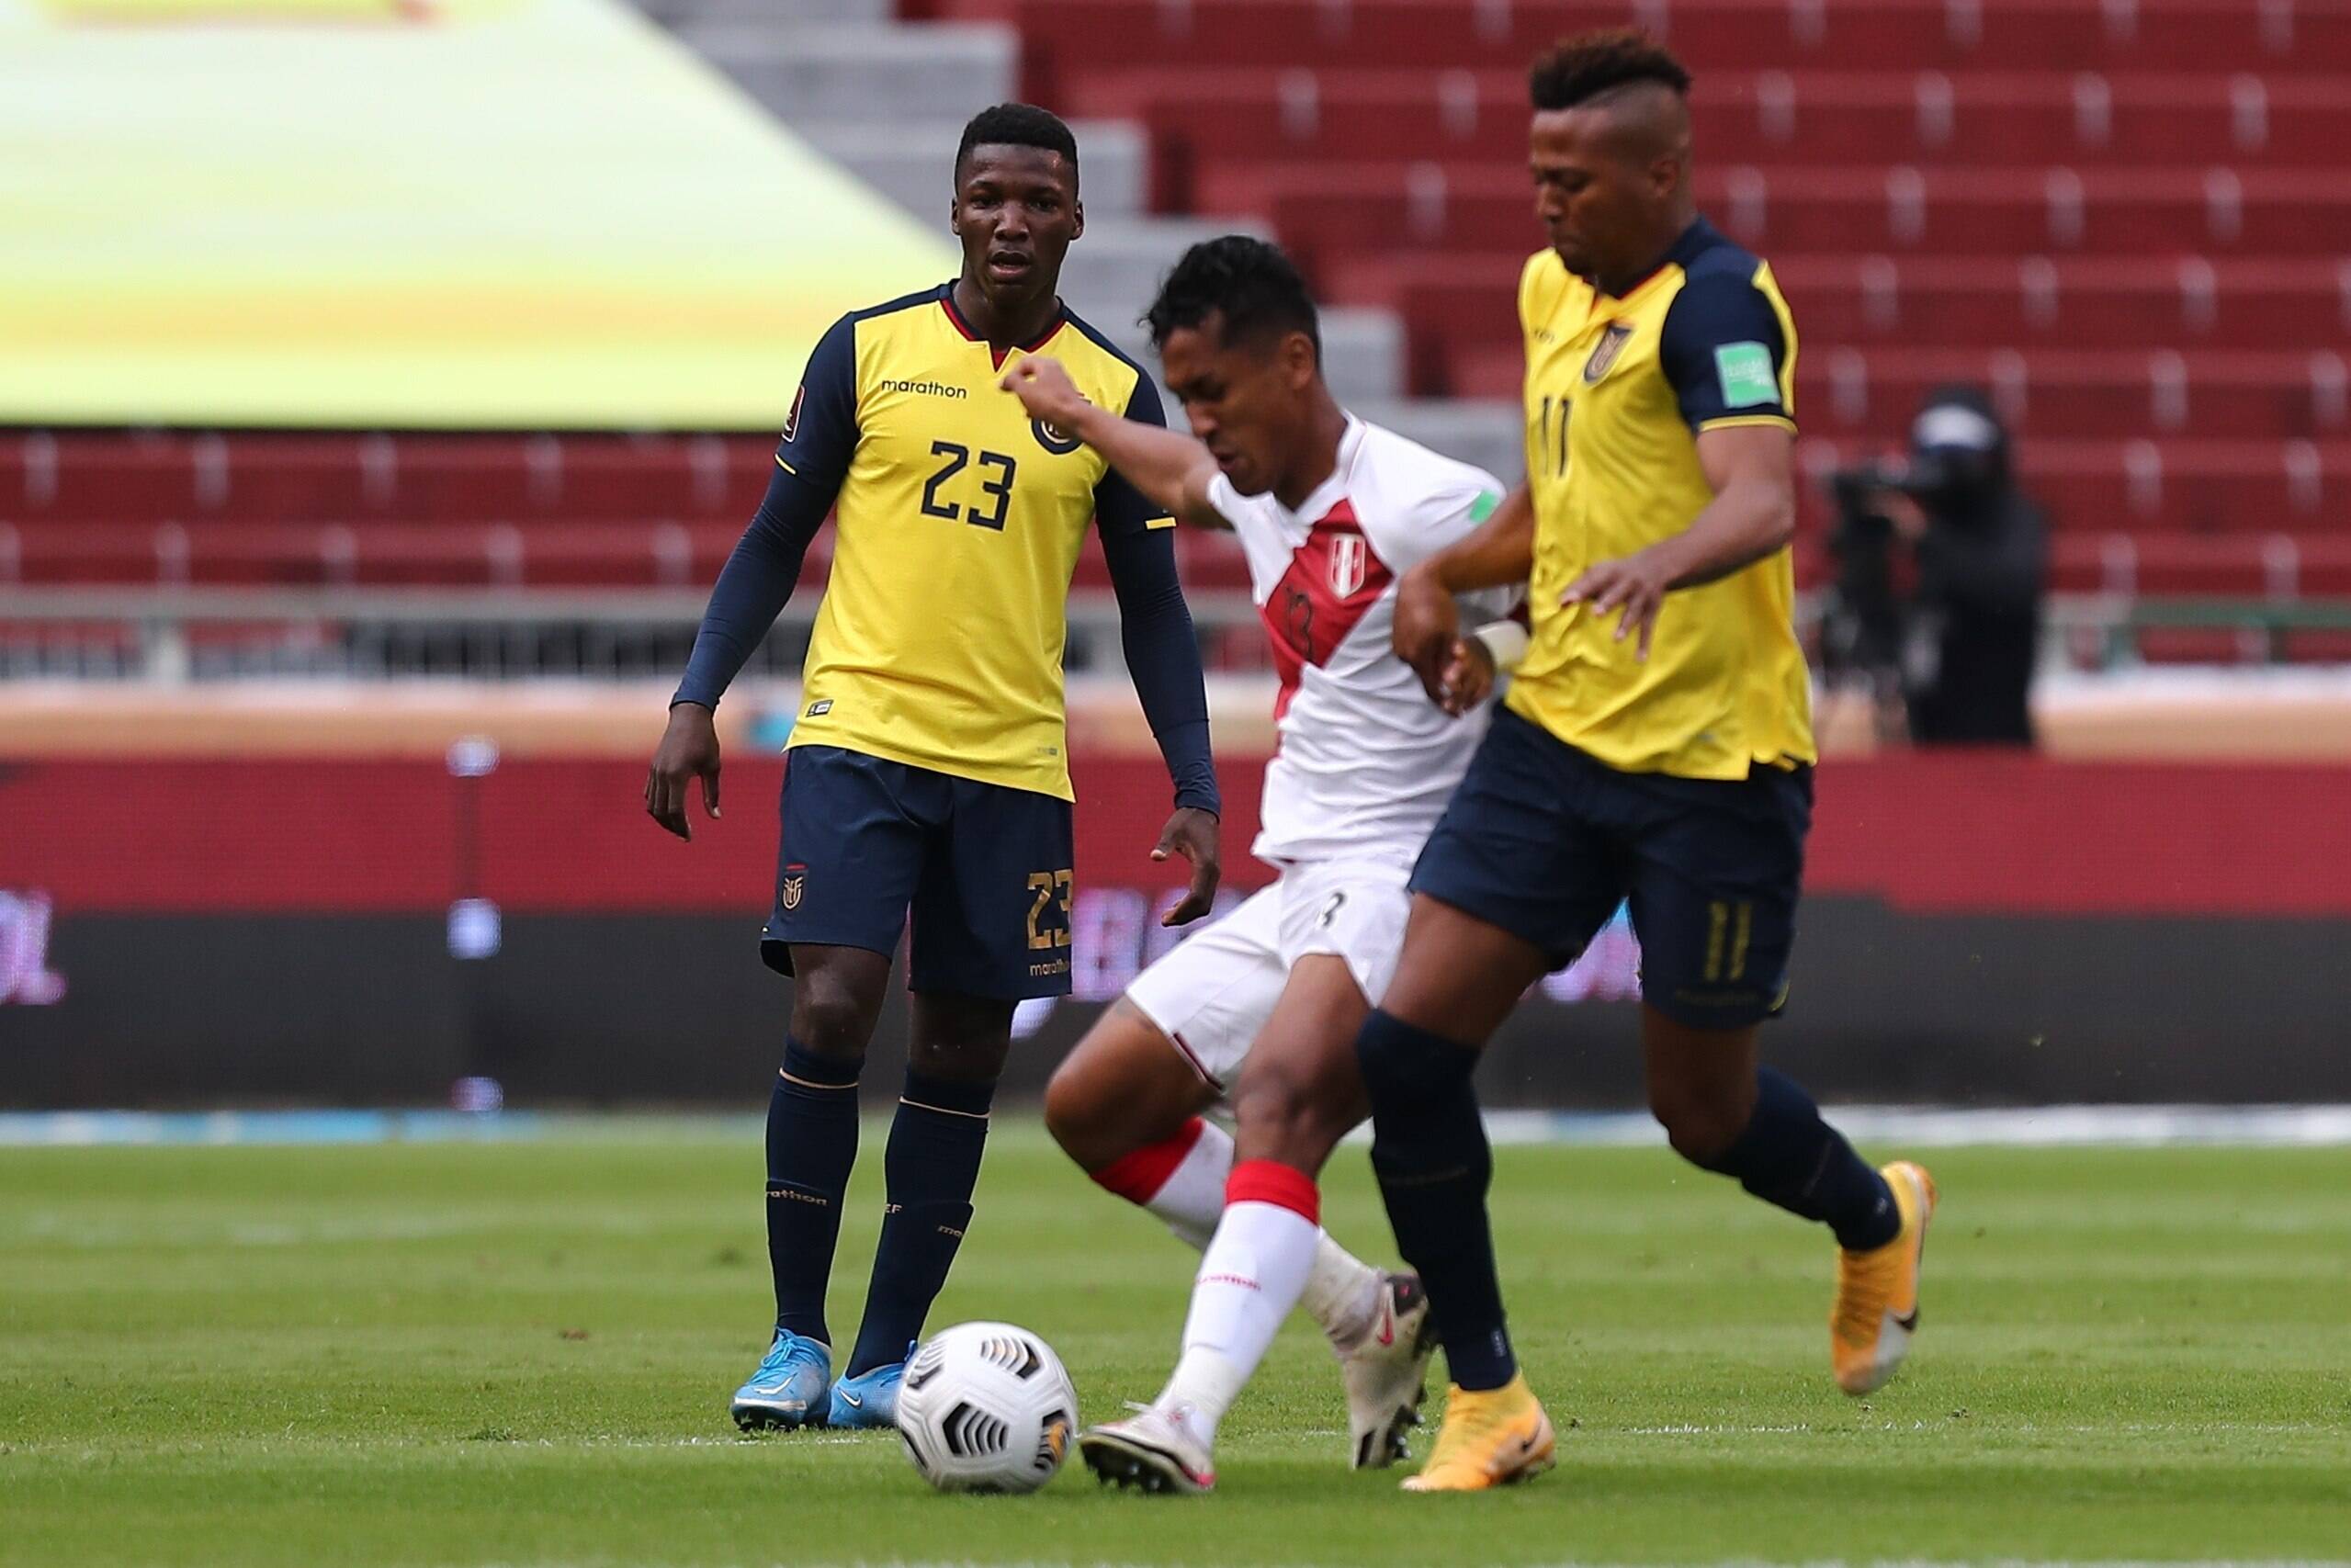 Ecuador S Michael Estrada (r) And Moises Caicedo (l) In Action Against Peru S Renato Tapia During A Match Amid The South